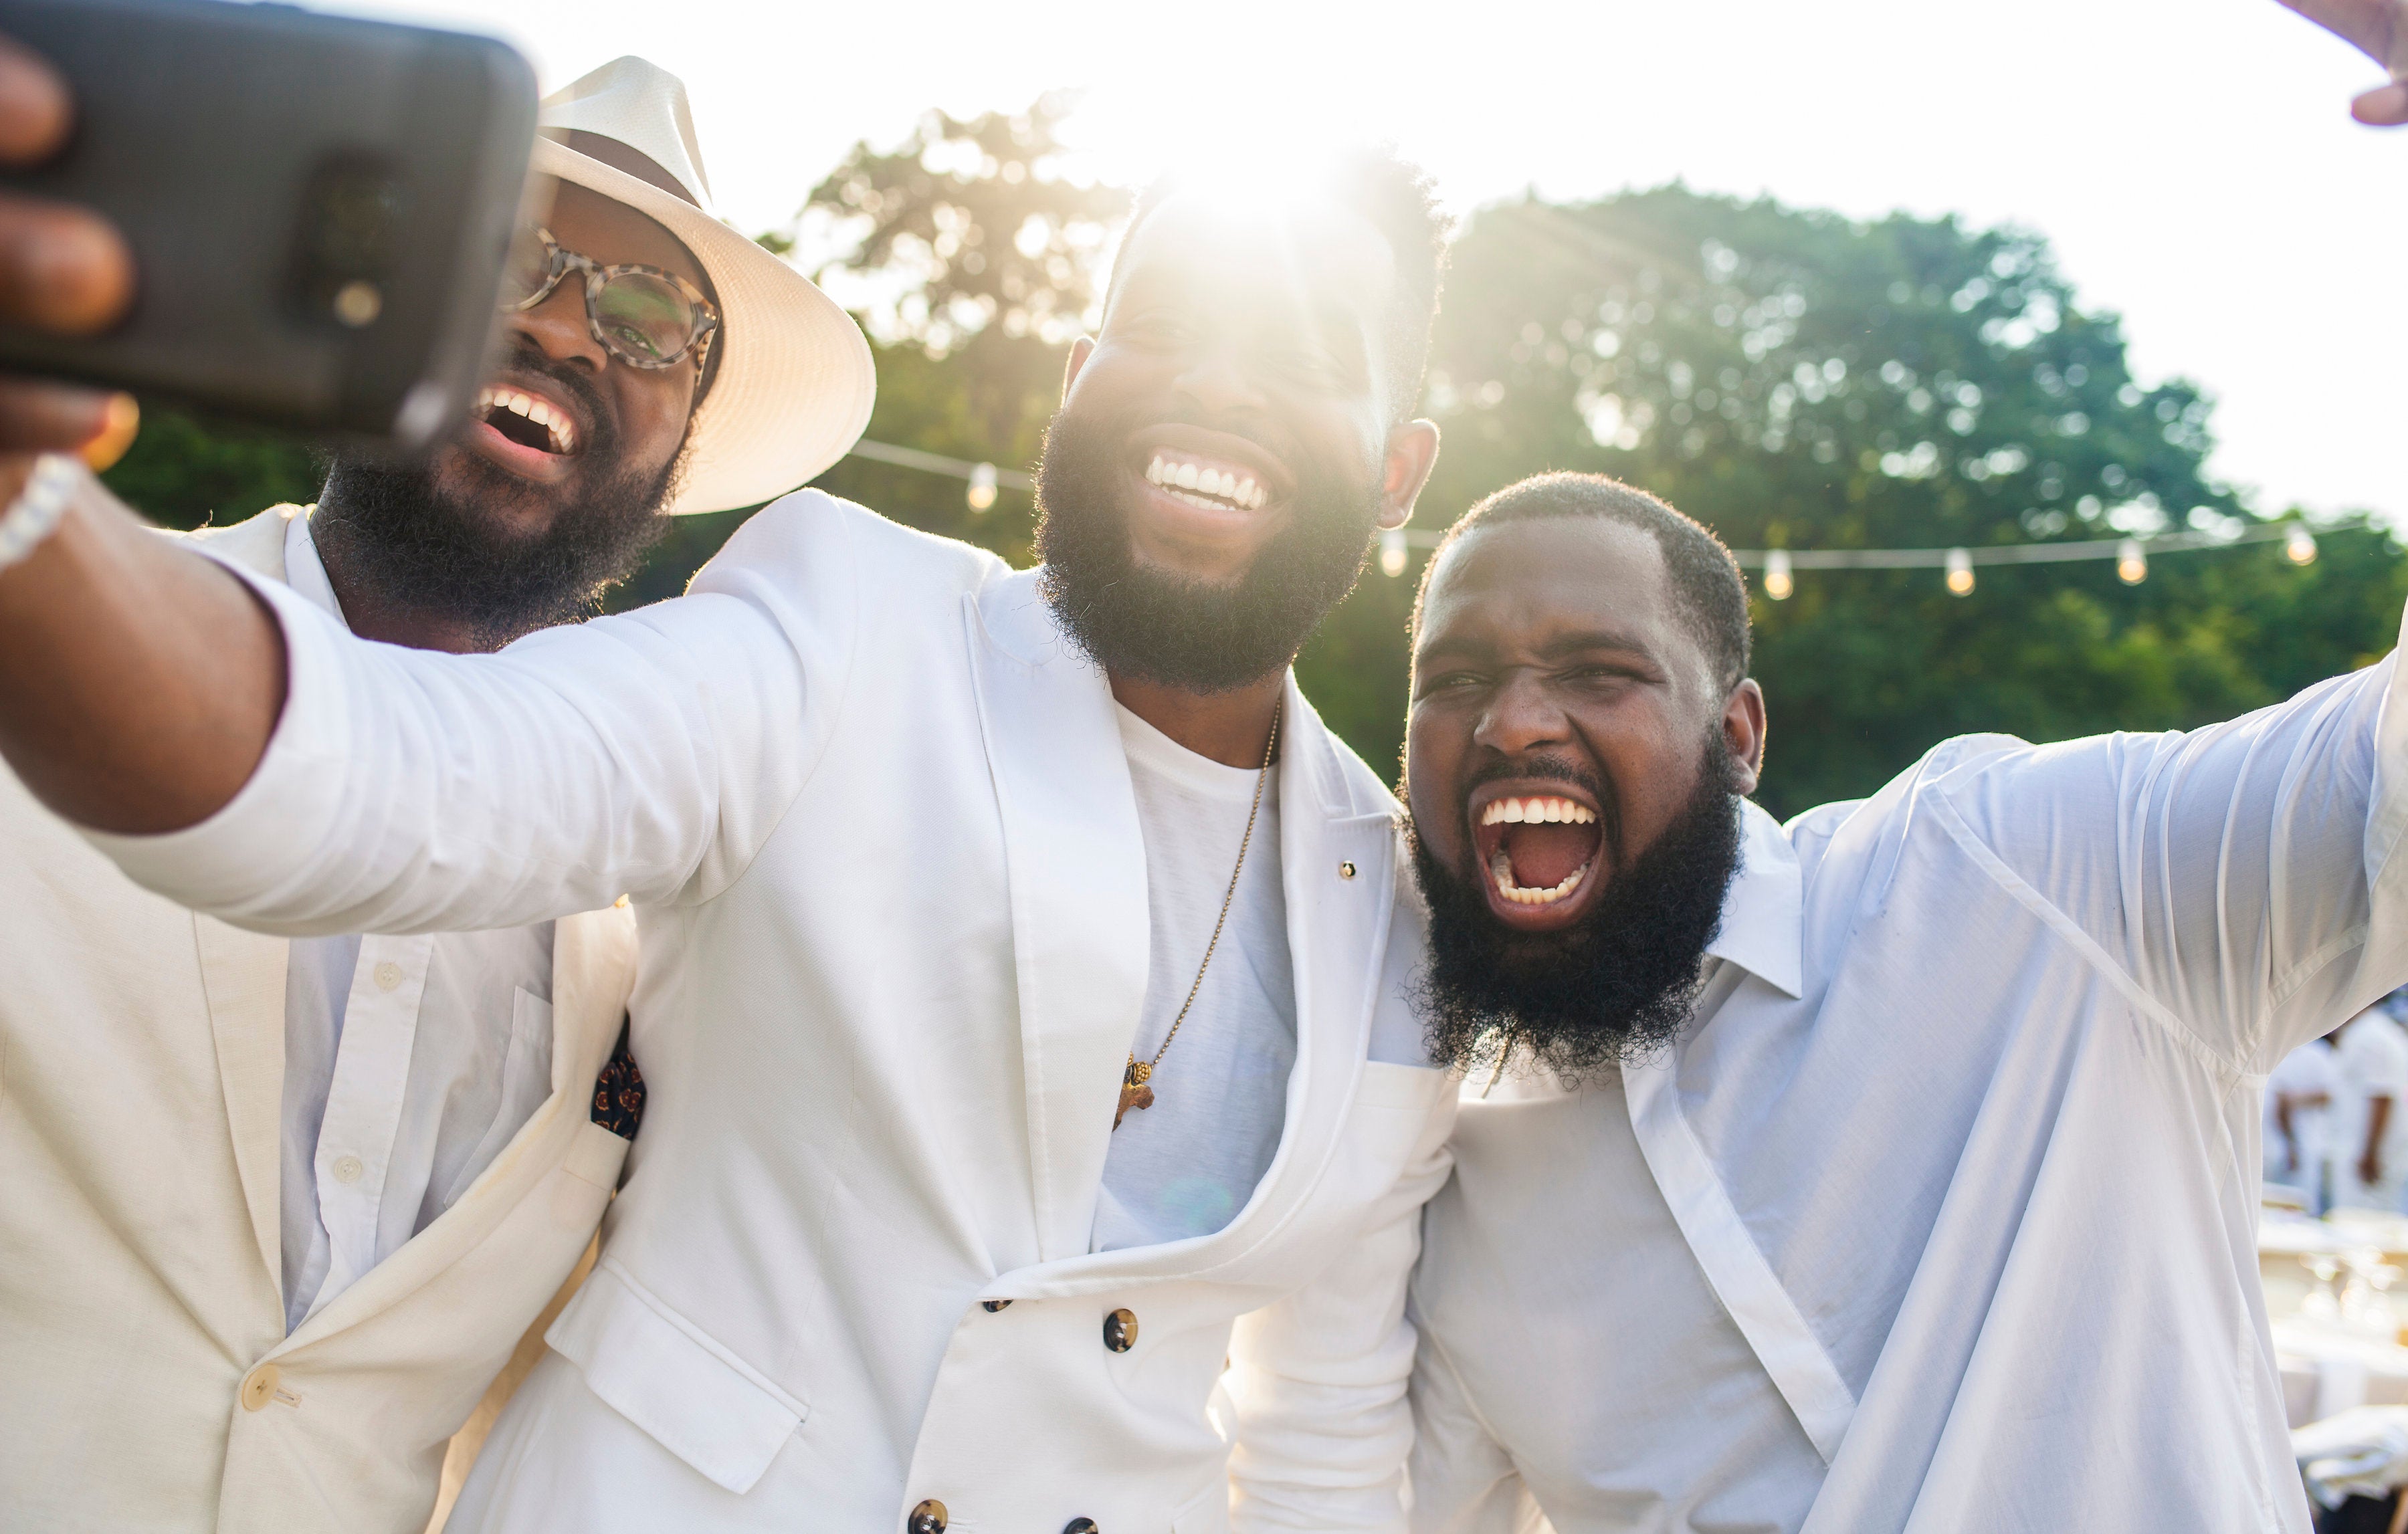 These Pictures of Happy Black People Will Instantly Brighten Your Day
